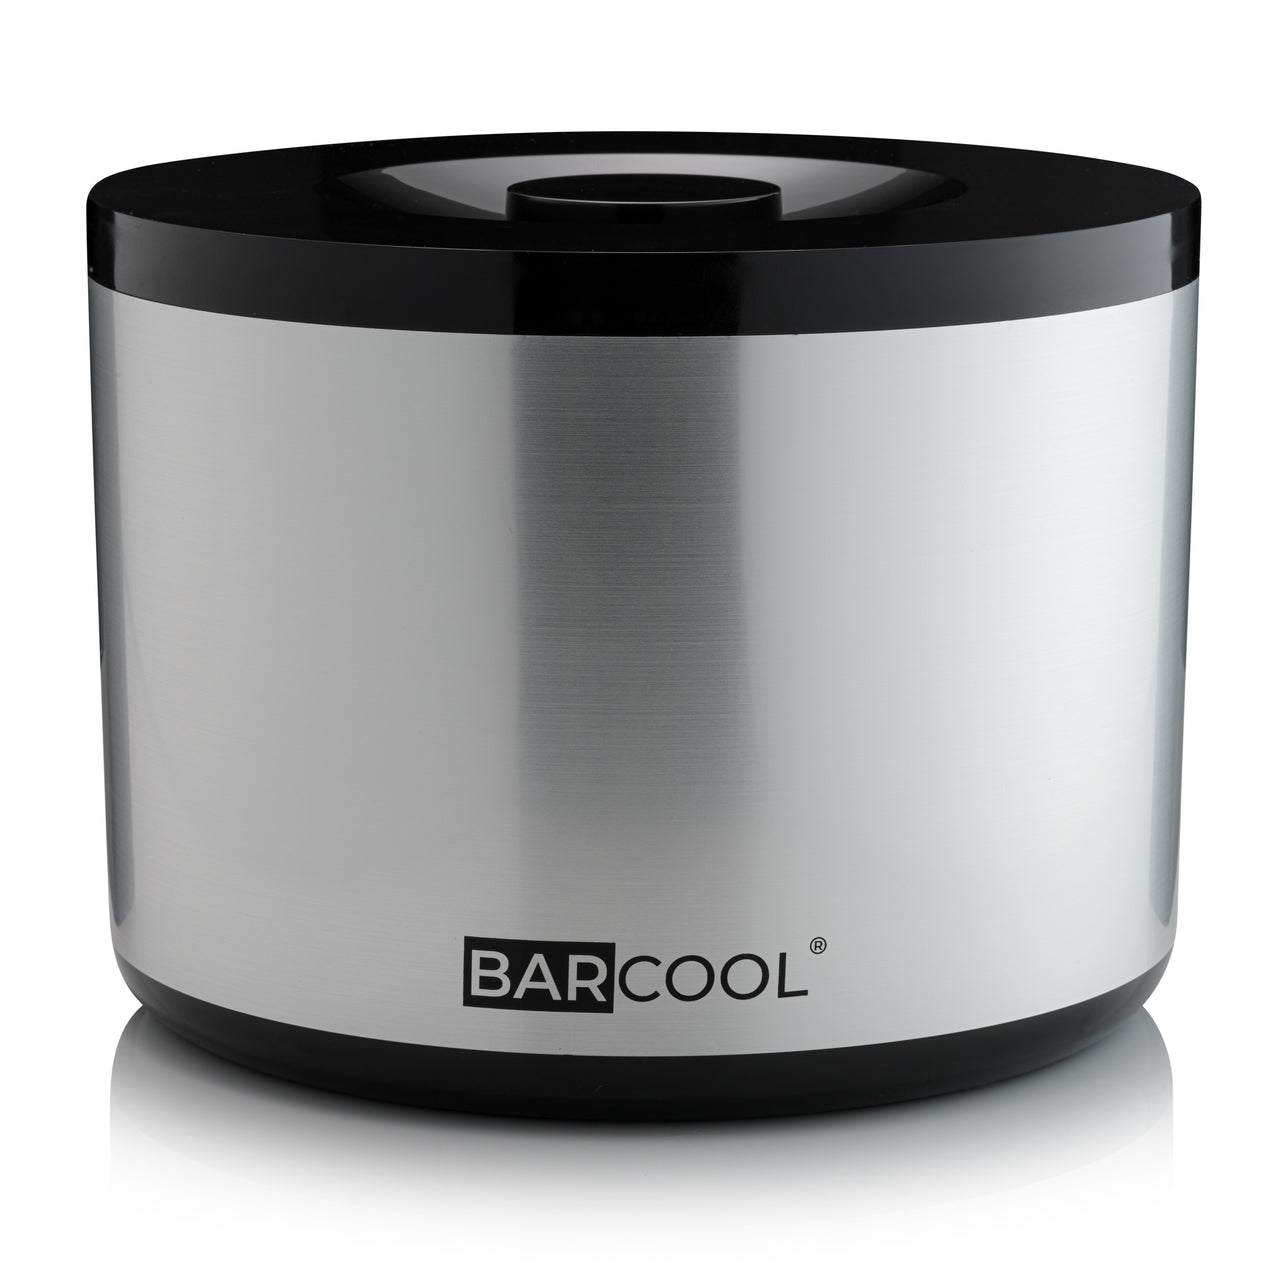 Barcool 10L Ice Bucket - Round Silver